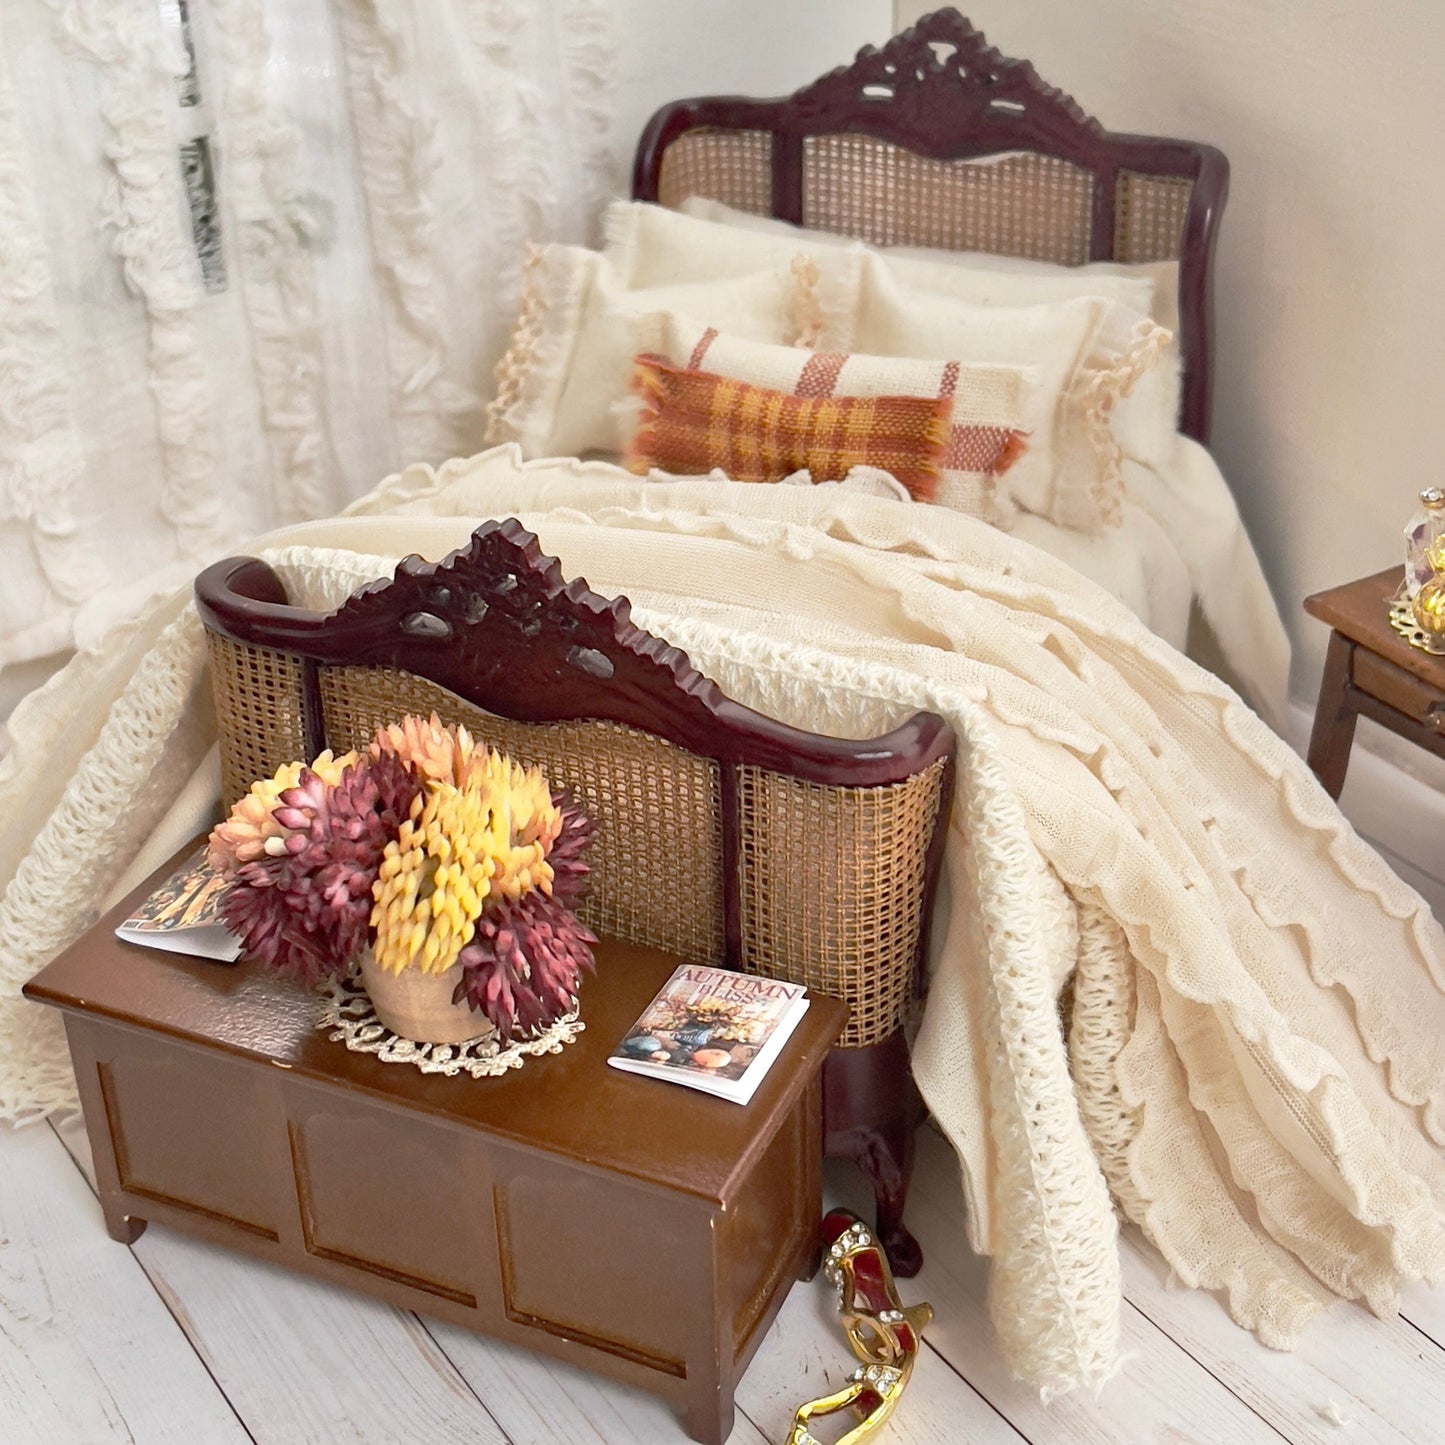 Chantallena Doll House Duvet Covers double Home for the Holidays- Autumn Eight Piece Tan Cotton Muslin Bedding Set with Ruffled Throw | Autumn Romance